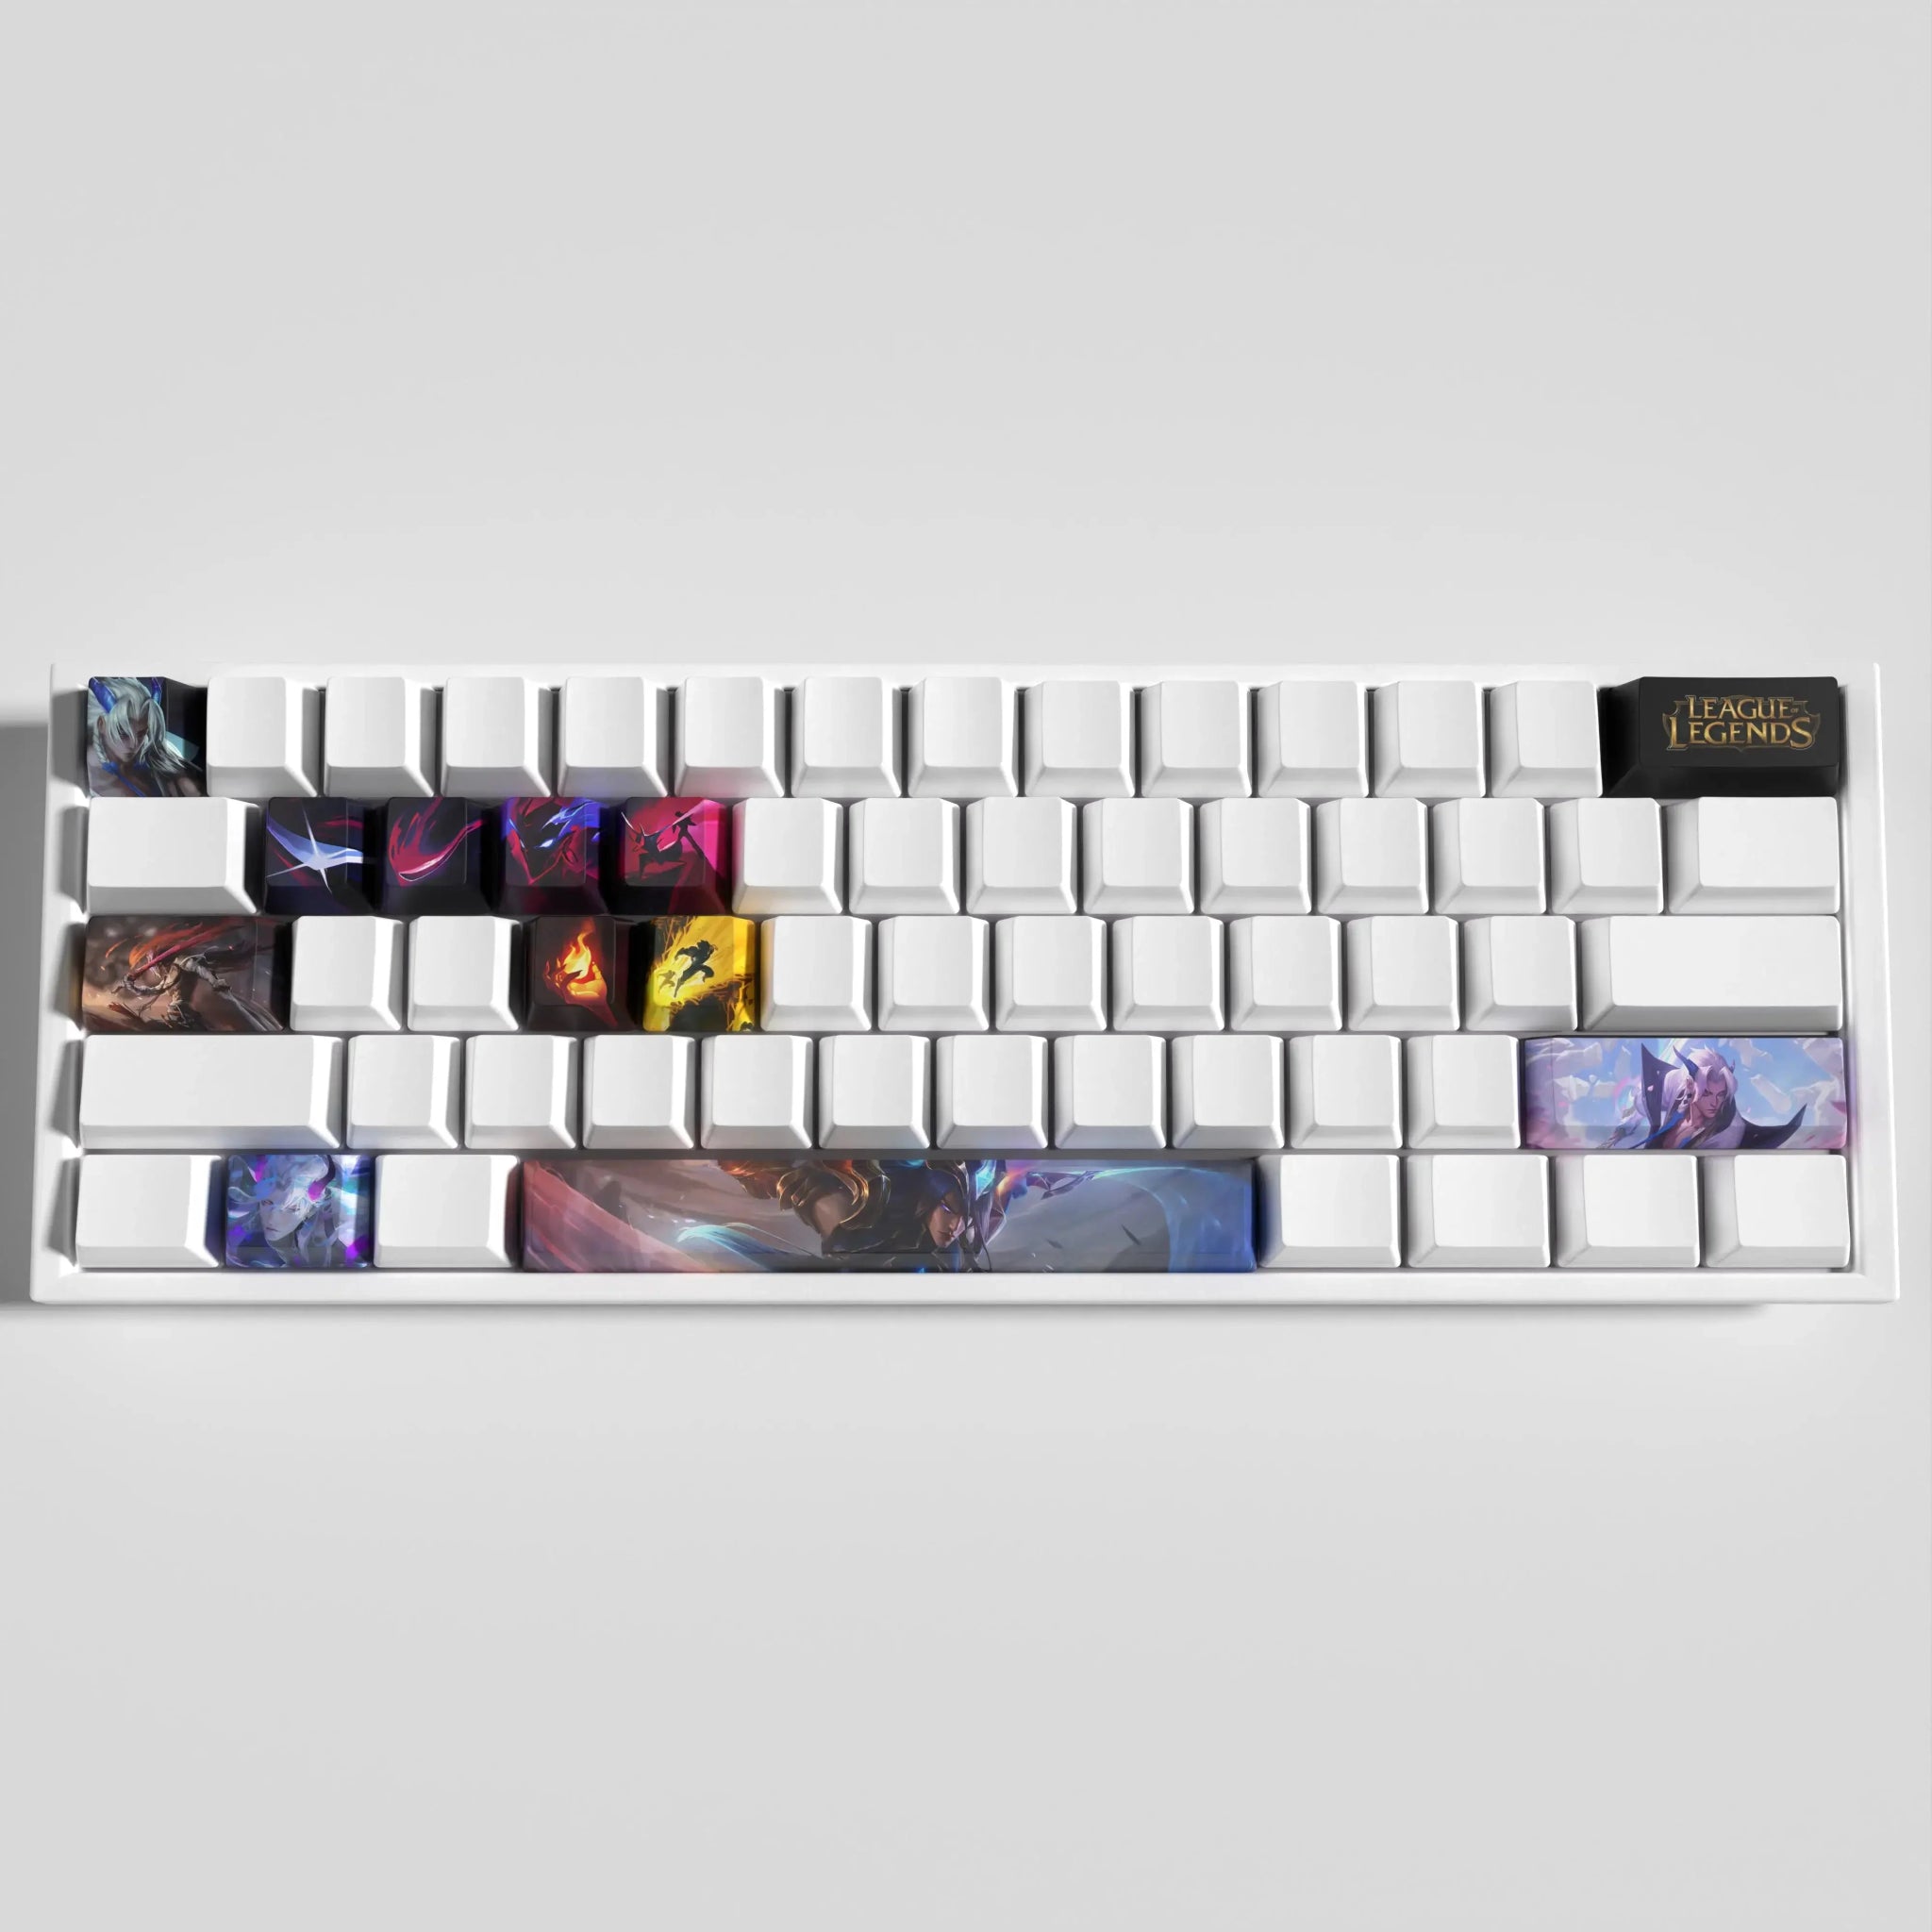 Keycaps Yone - Déco Gaming